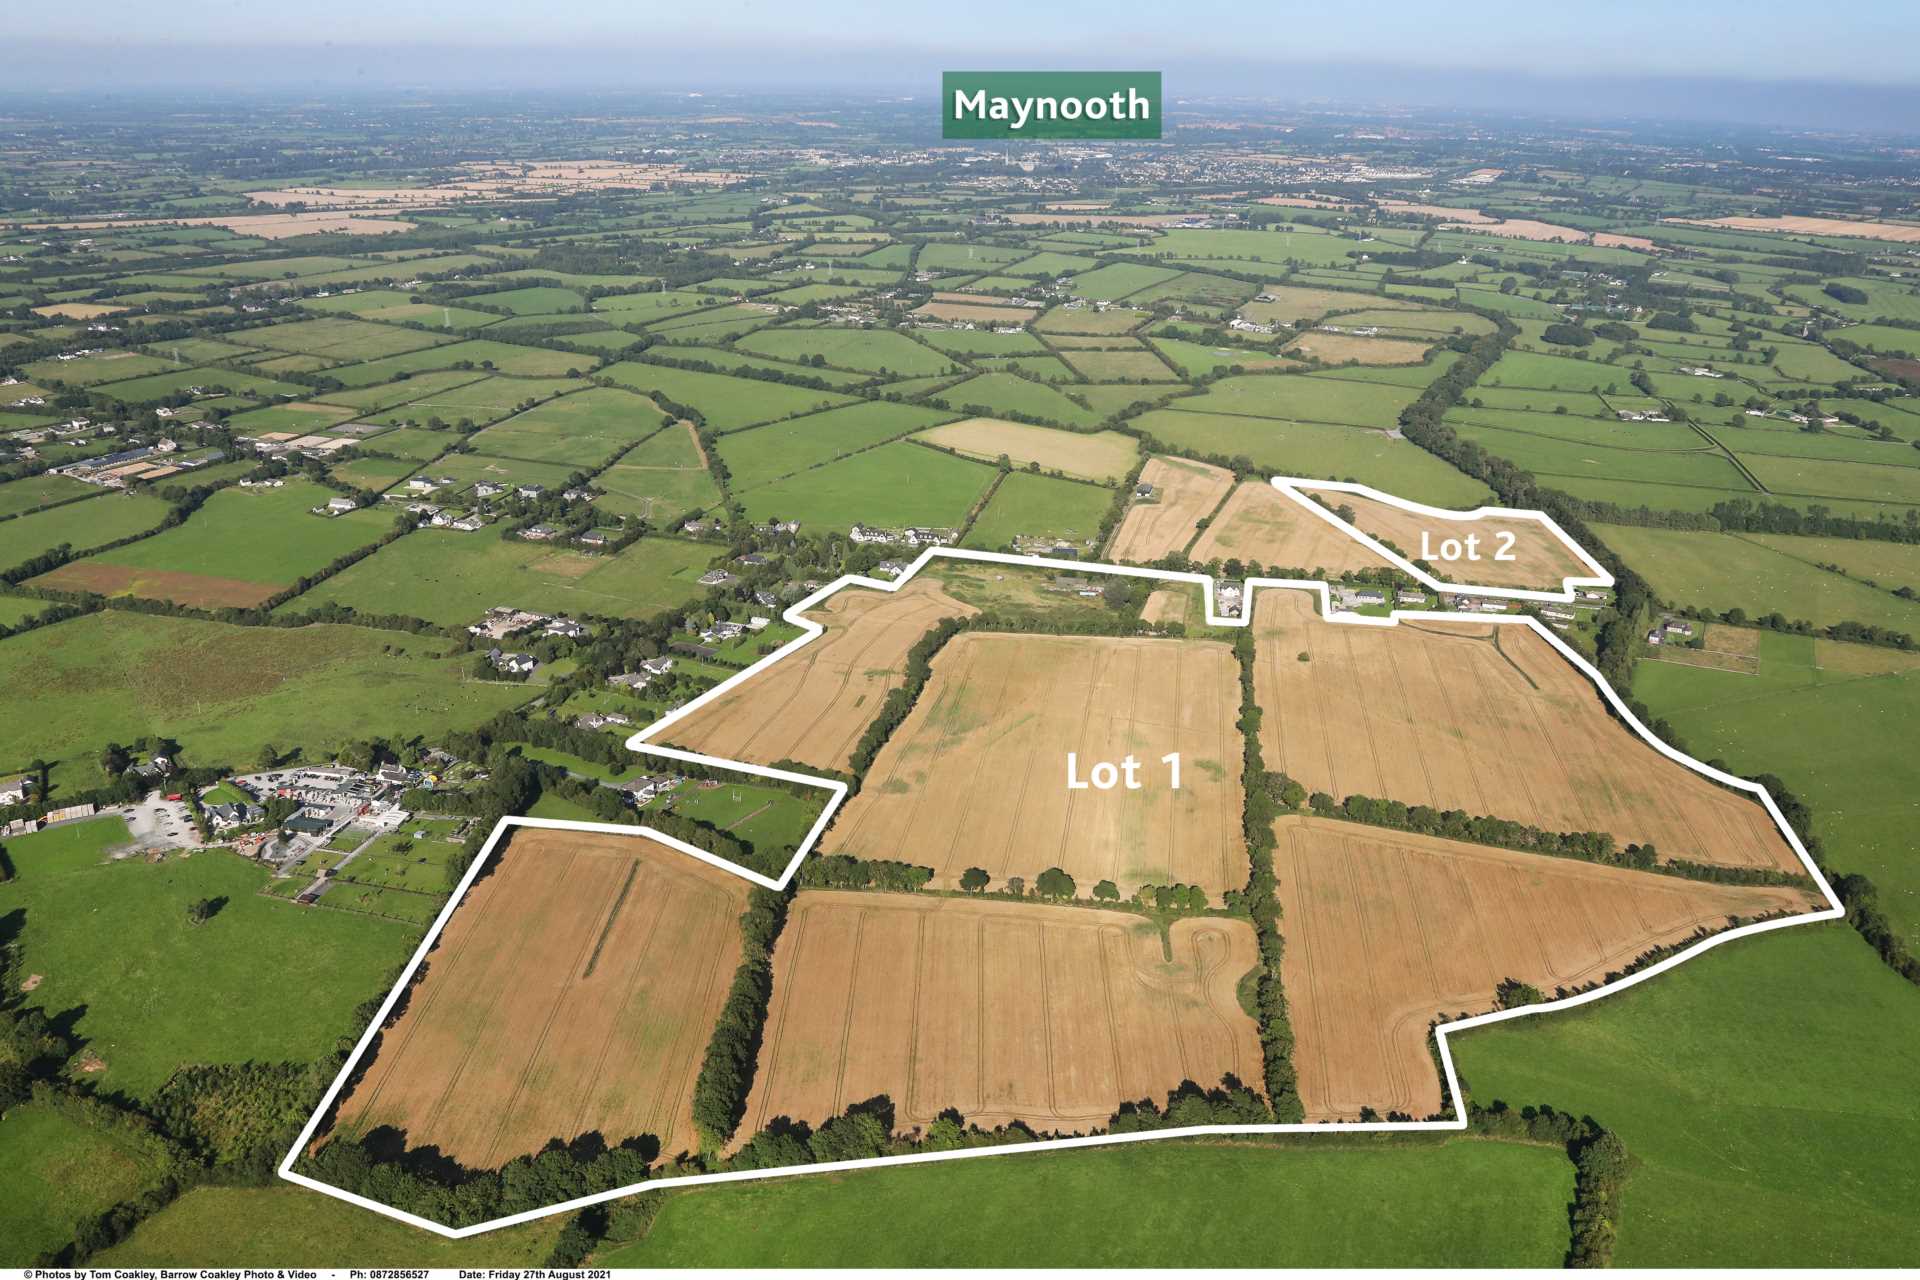 Unique Opportunity in Clonfert, Maynooth, Co. Kildare Available In Lots